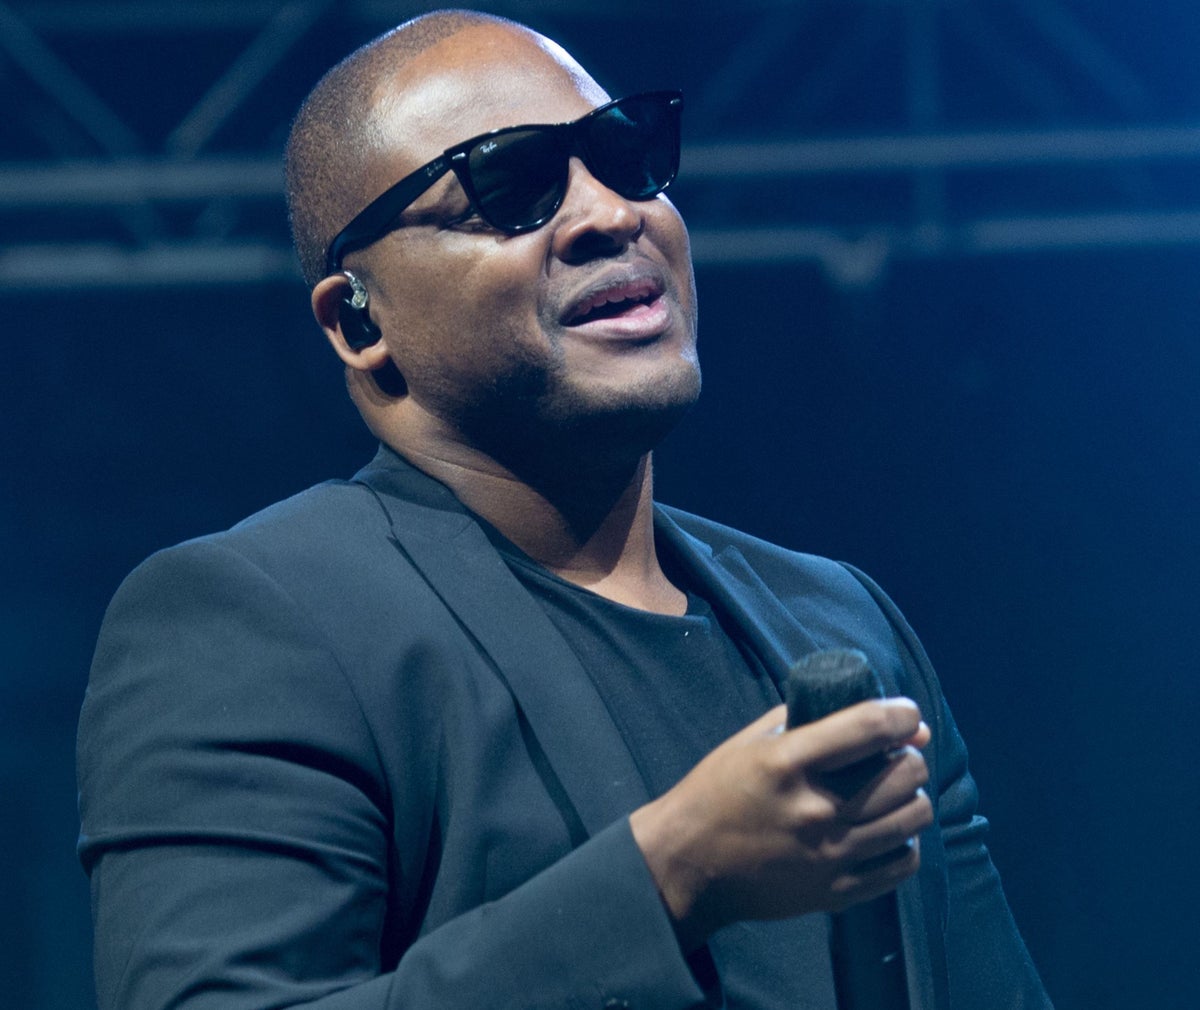 Taio Cruz Quits Social Media After Tiktok Bullying Gave Him Suicidal Thoughts The Independent